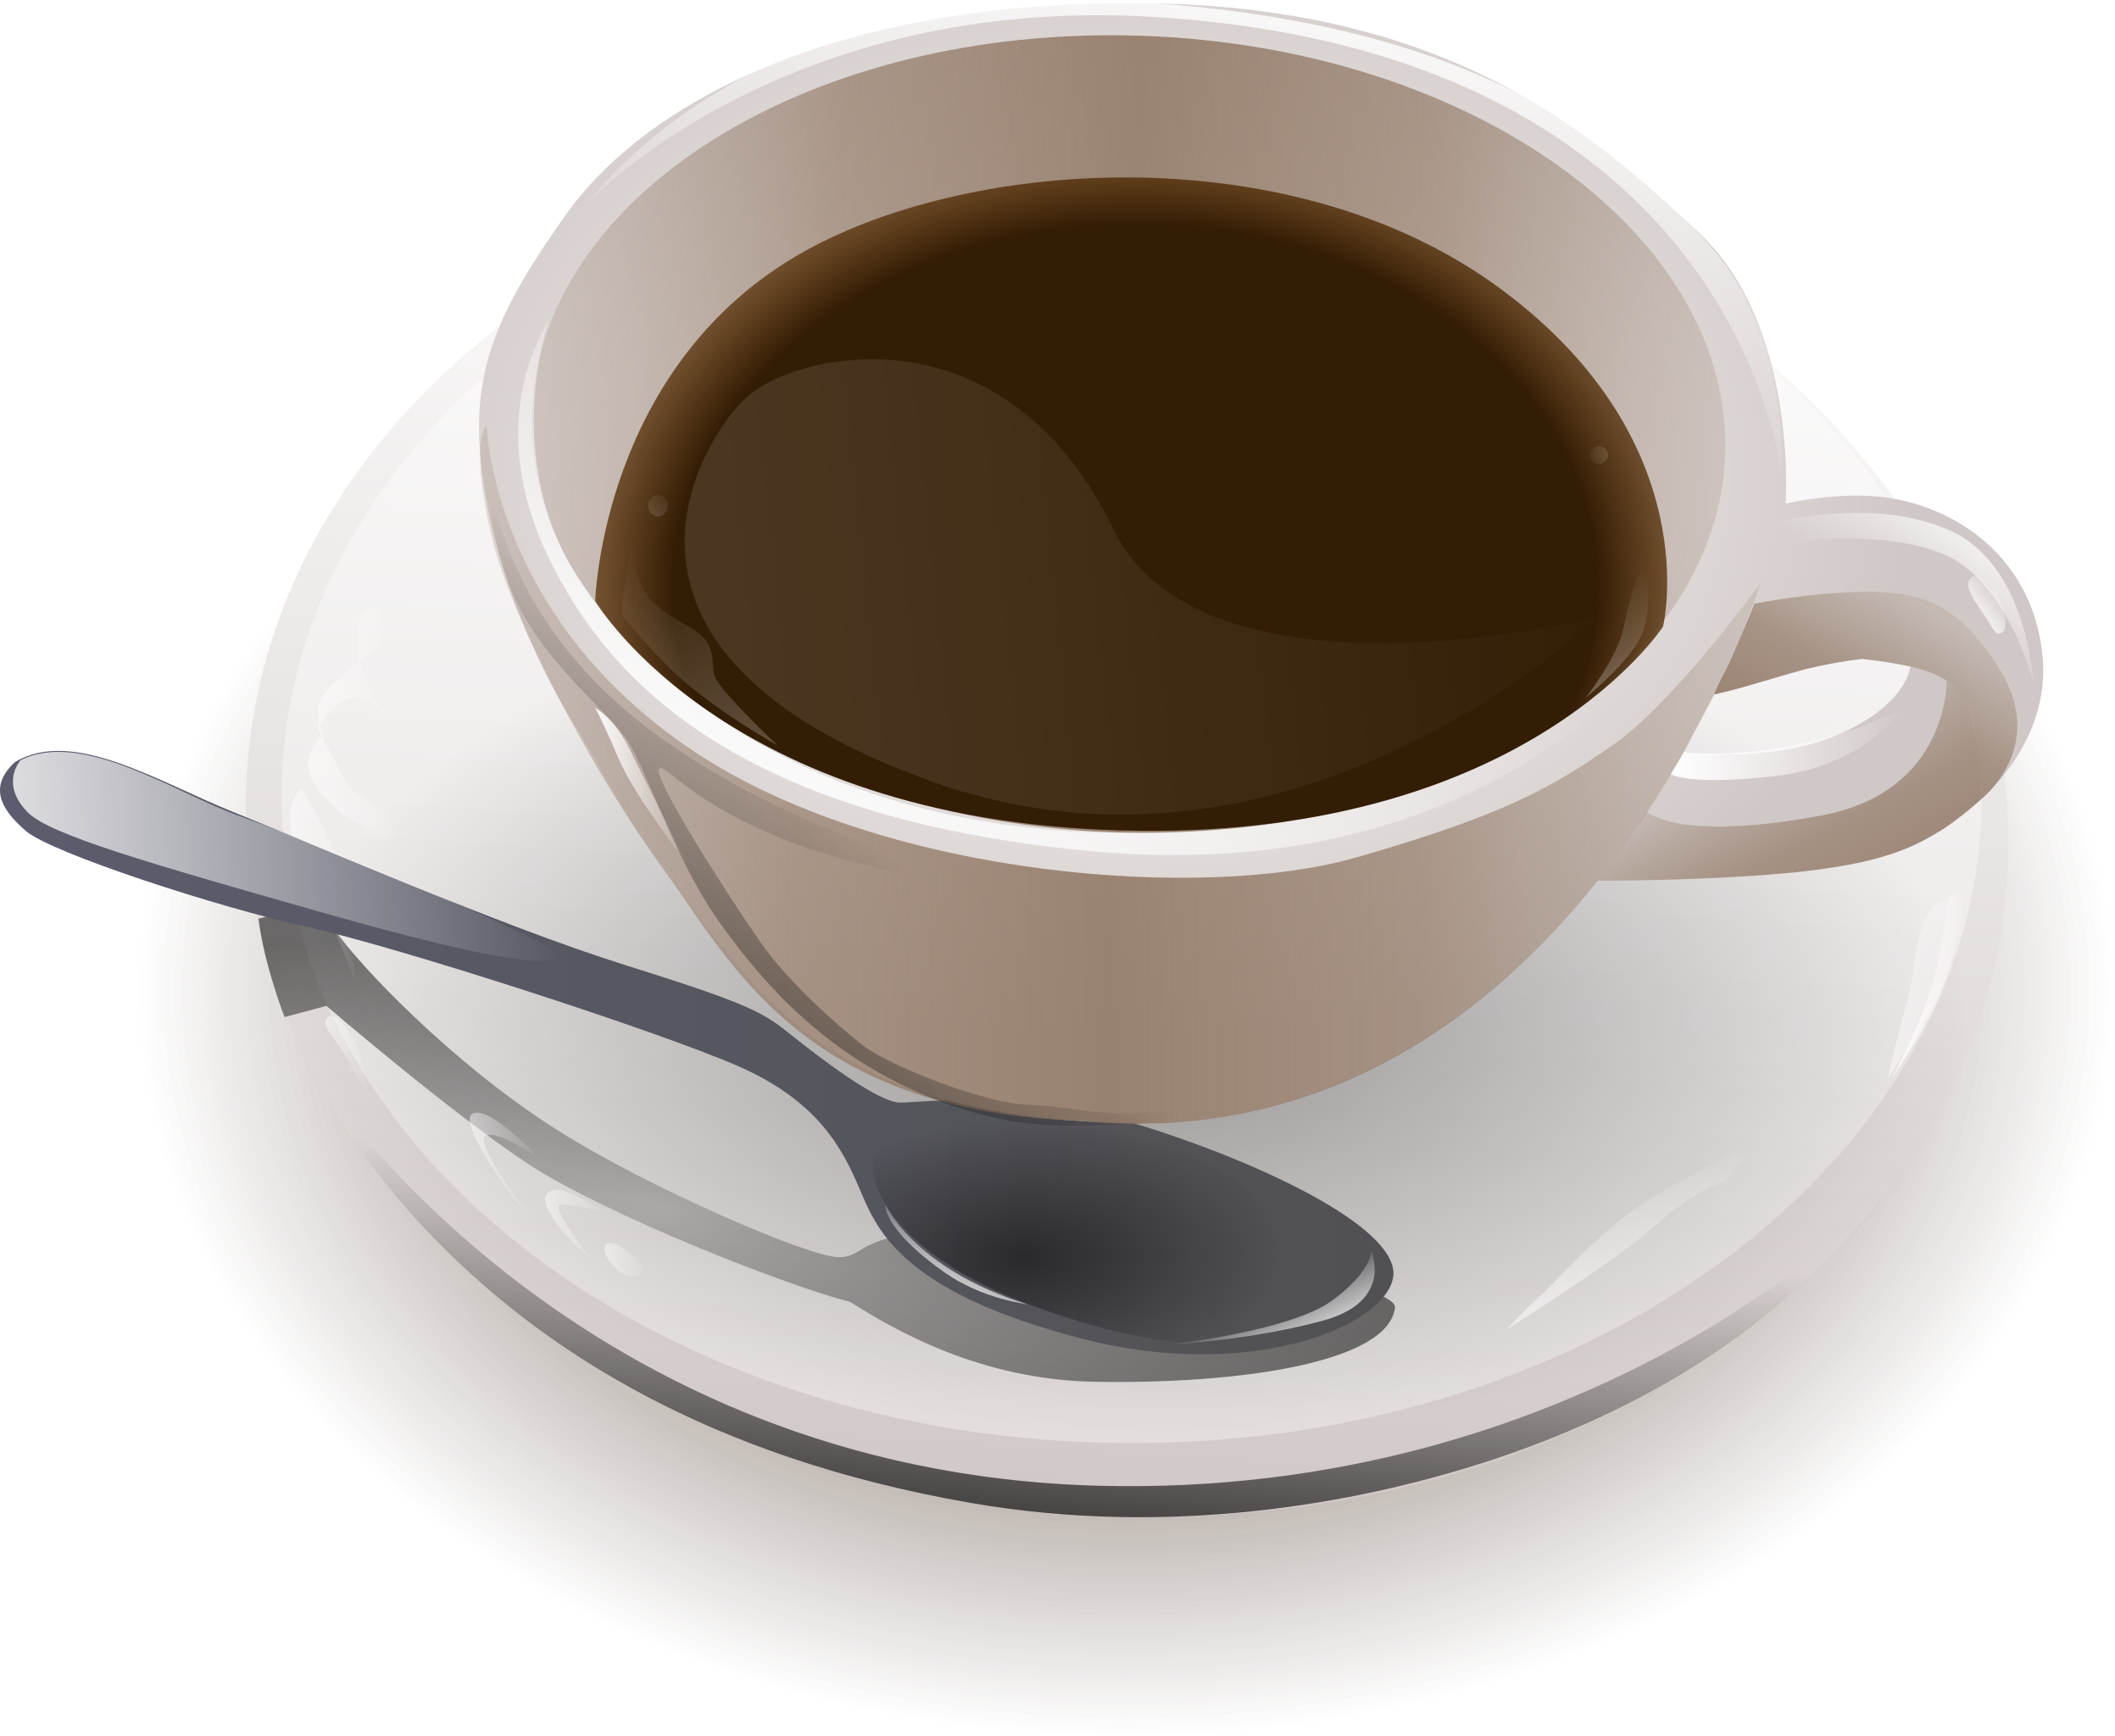 https://d3czfiwbzom72b.cloudfront.net/wp-content/uploads/Cup-o-coffee-simple.svg.png